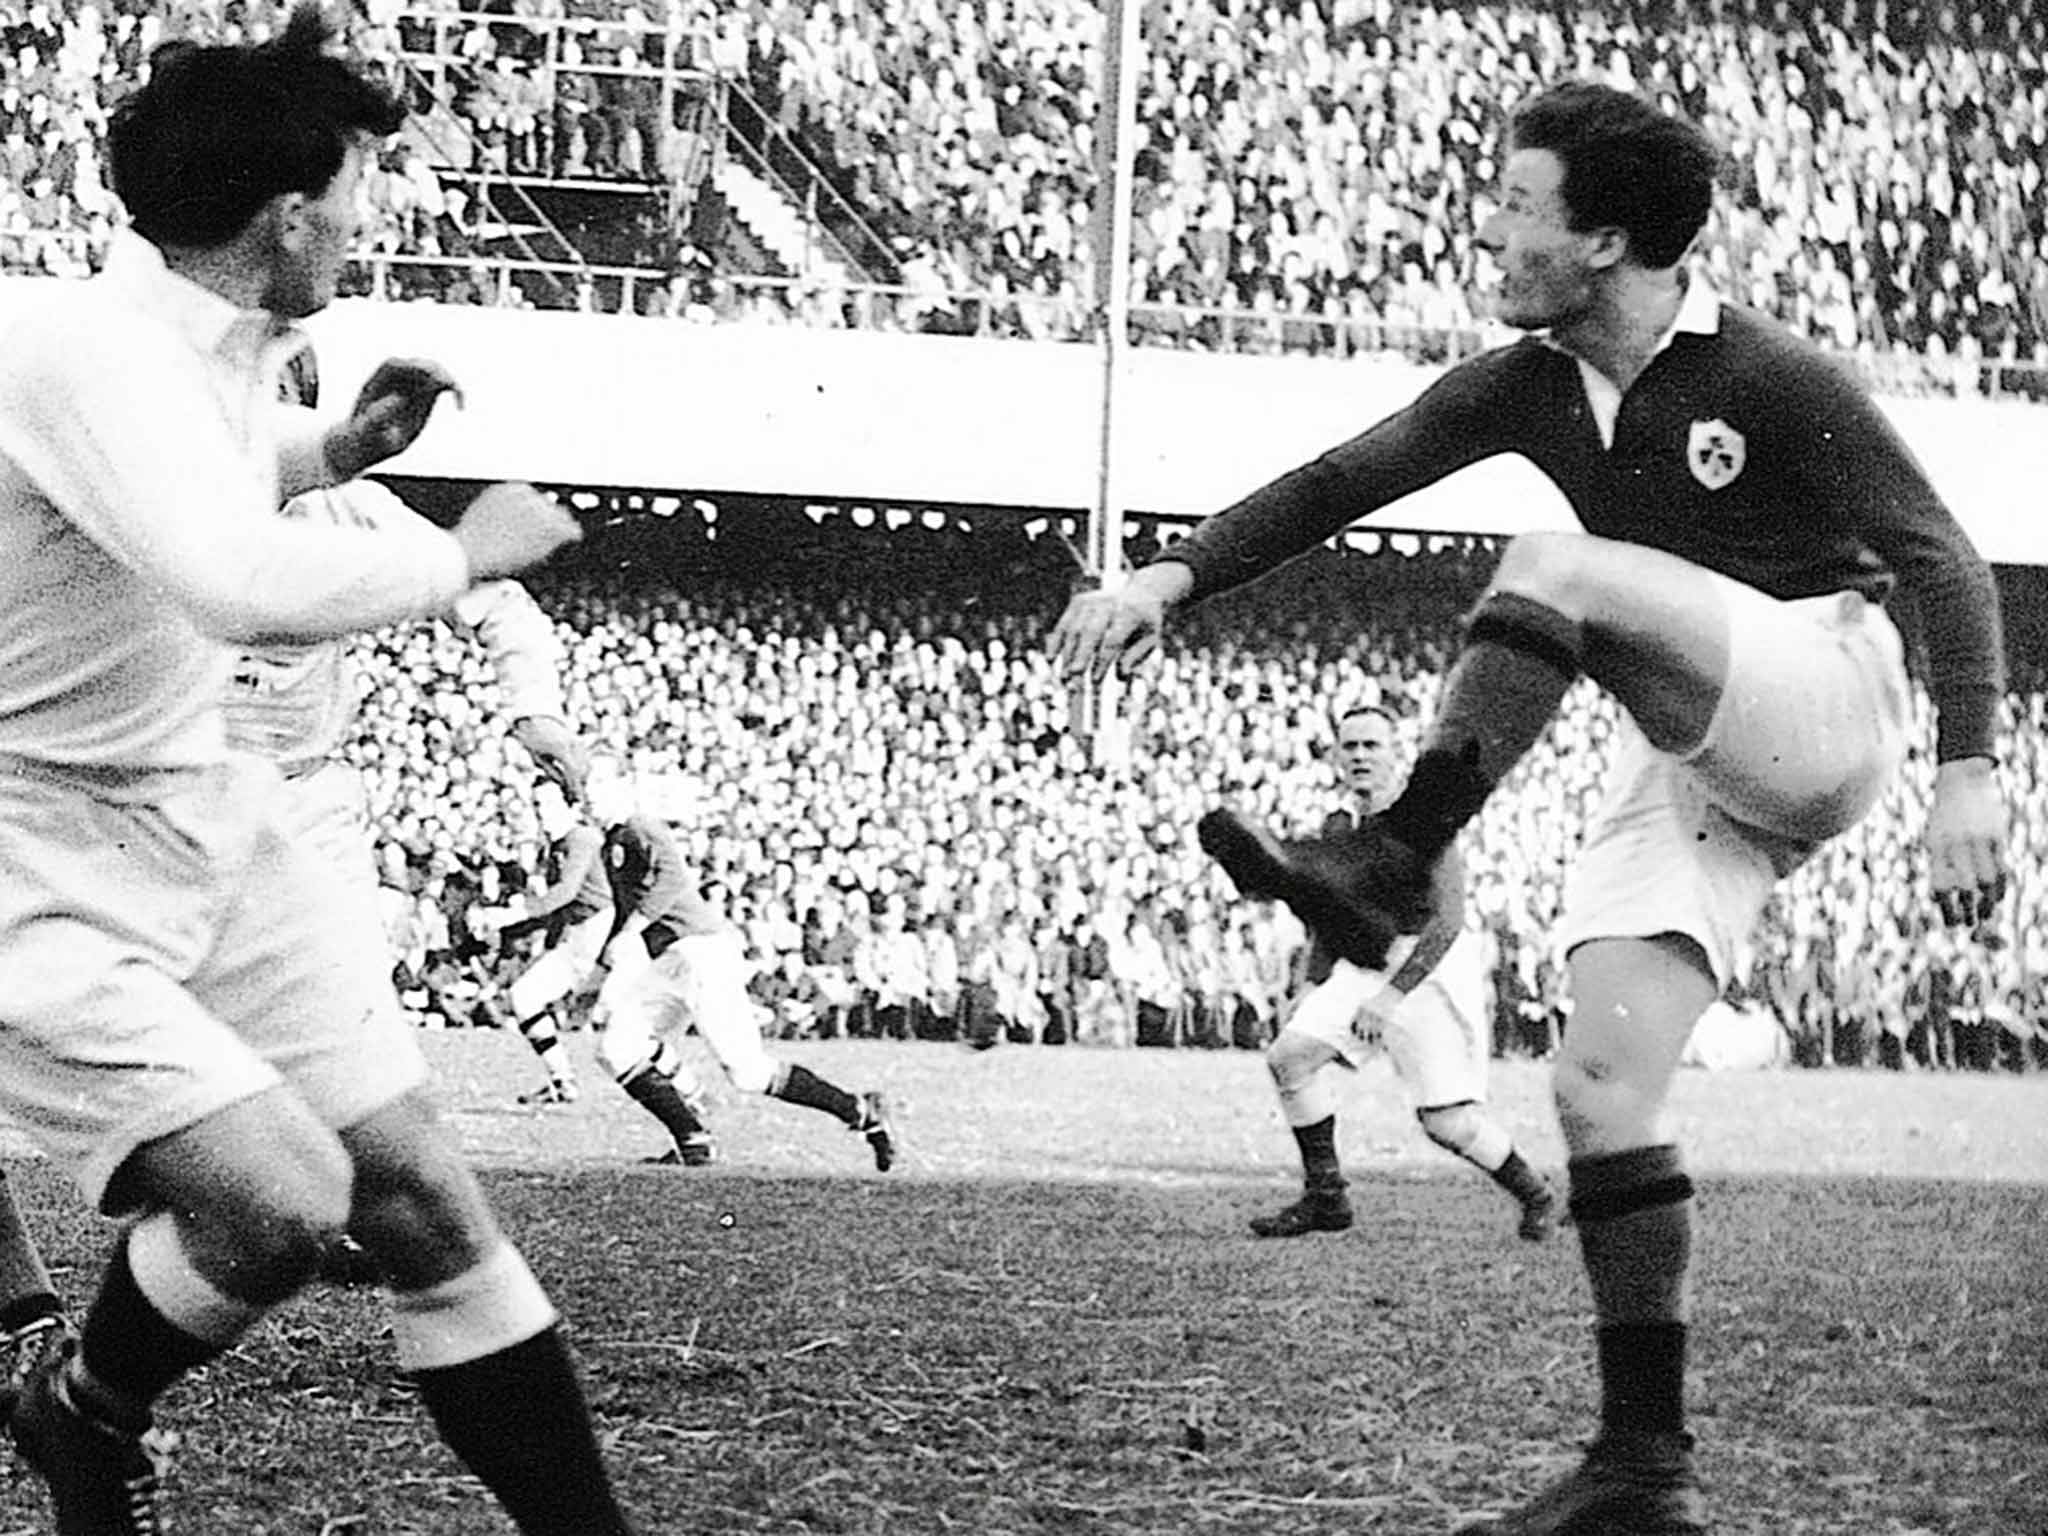 Kyle kicks from a scrum playing for Ireland against England at Lansdowne Road in 1949